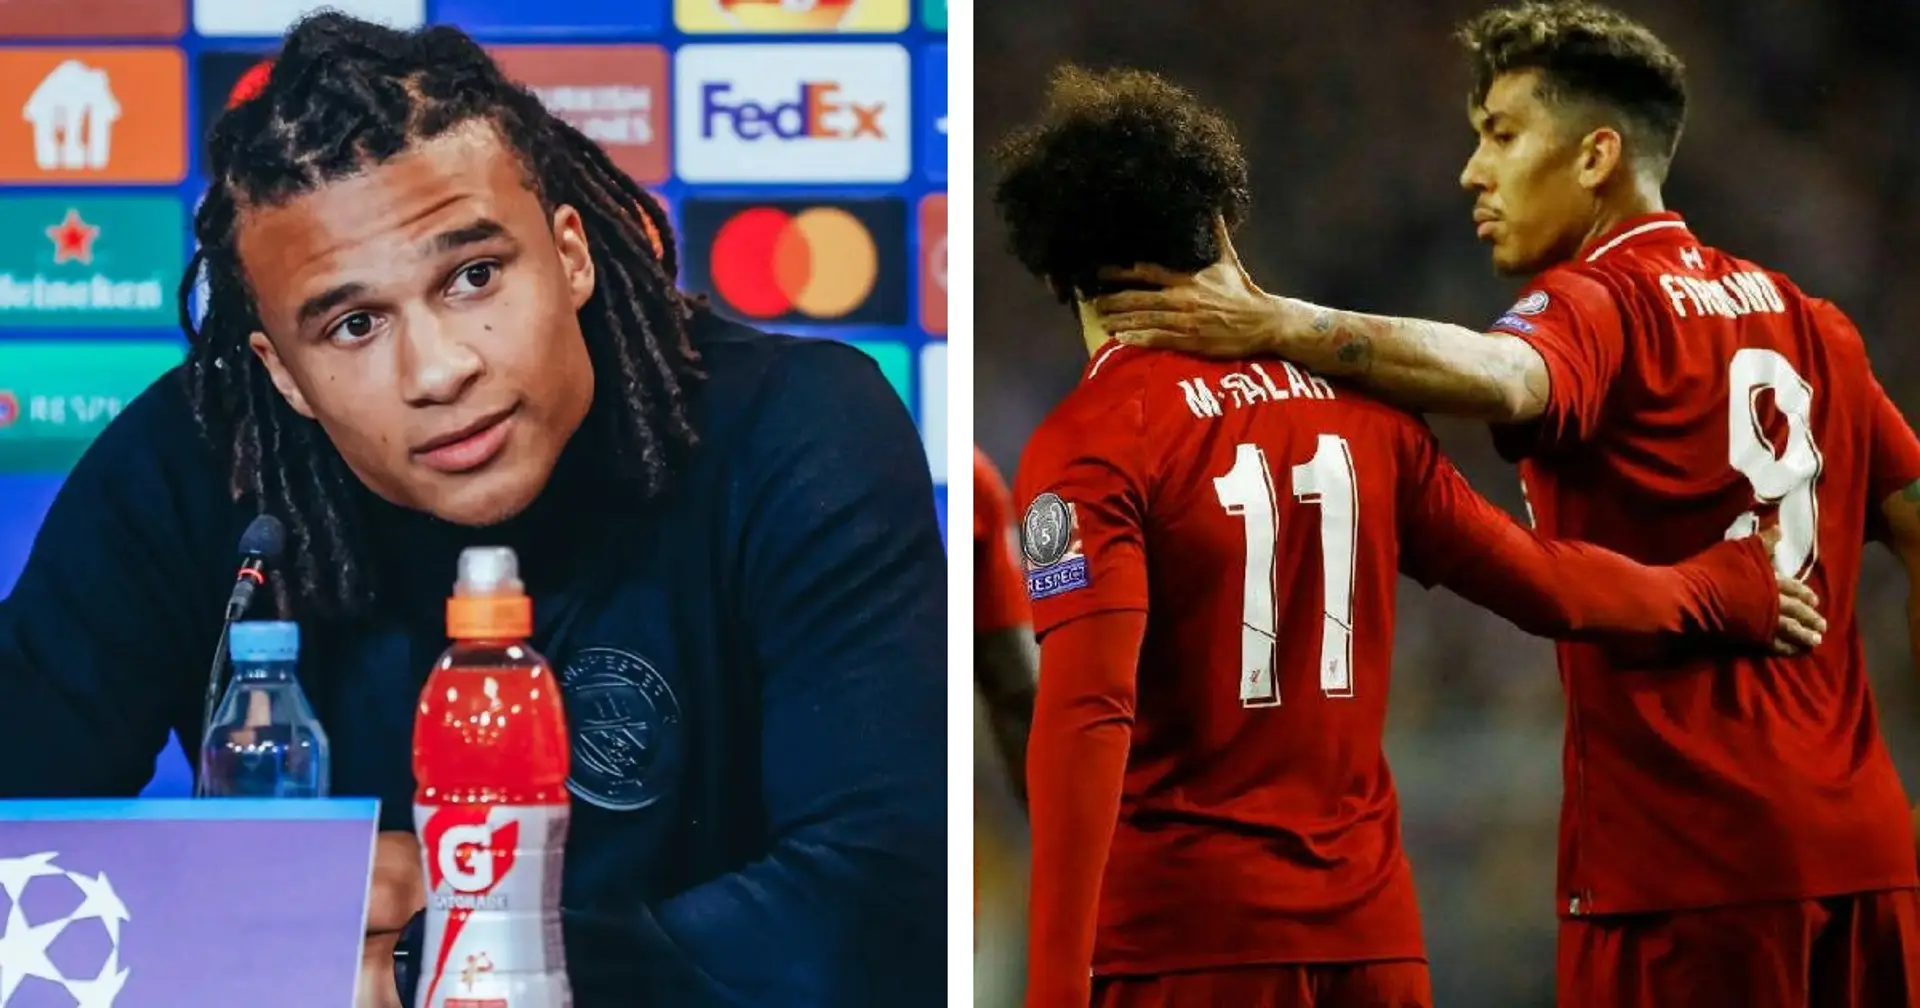 'He could do everything': Nathan Ake names Liverpool forward as the toughest opponent he has faced